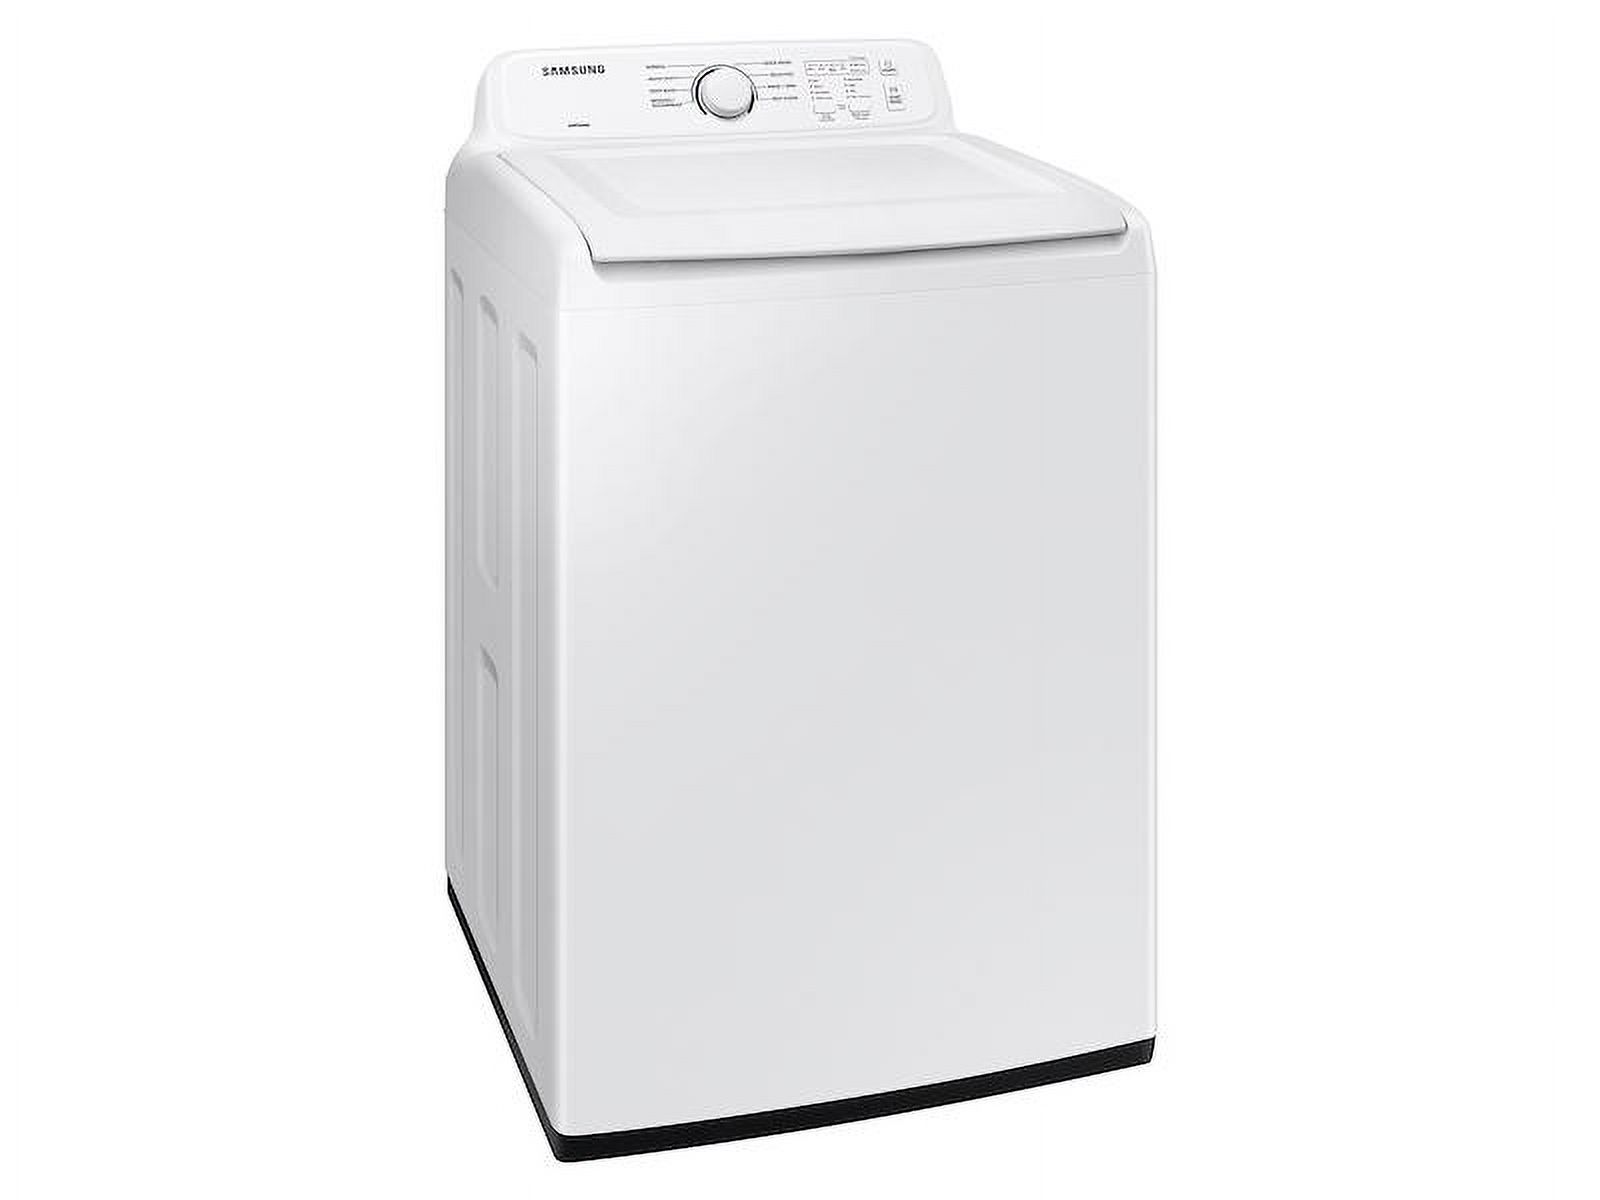 Samsung WA40A3005AW 4.0 Cu. Ft. High-Efficiency Top Load Washer - White - image 2 of 5